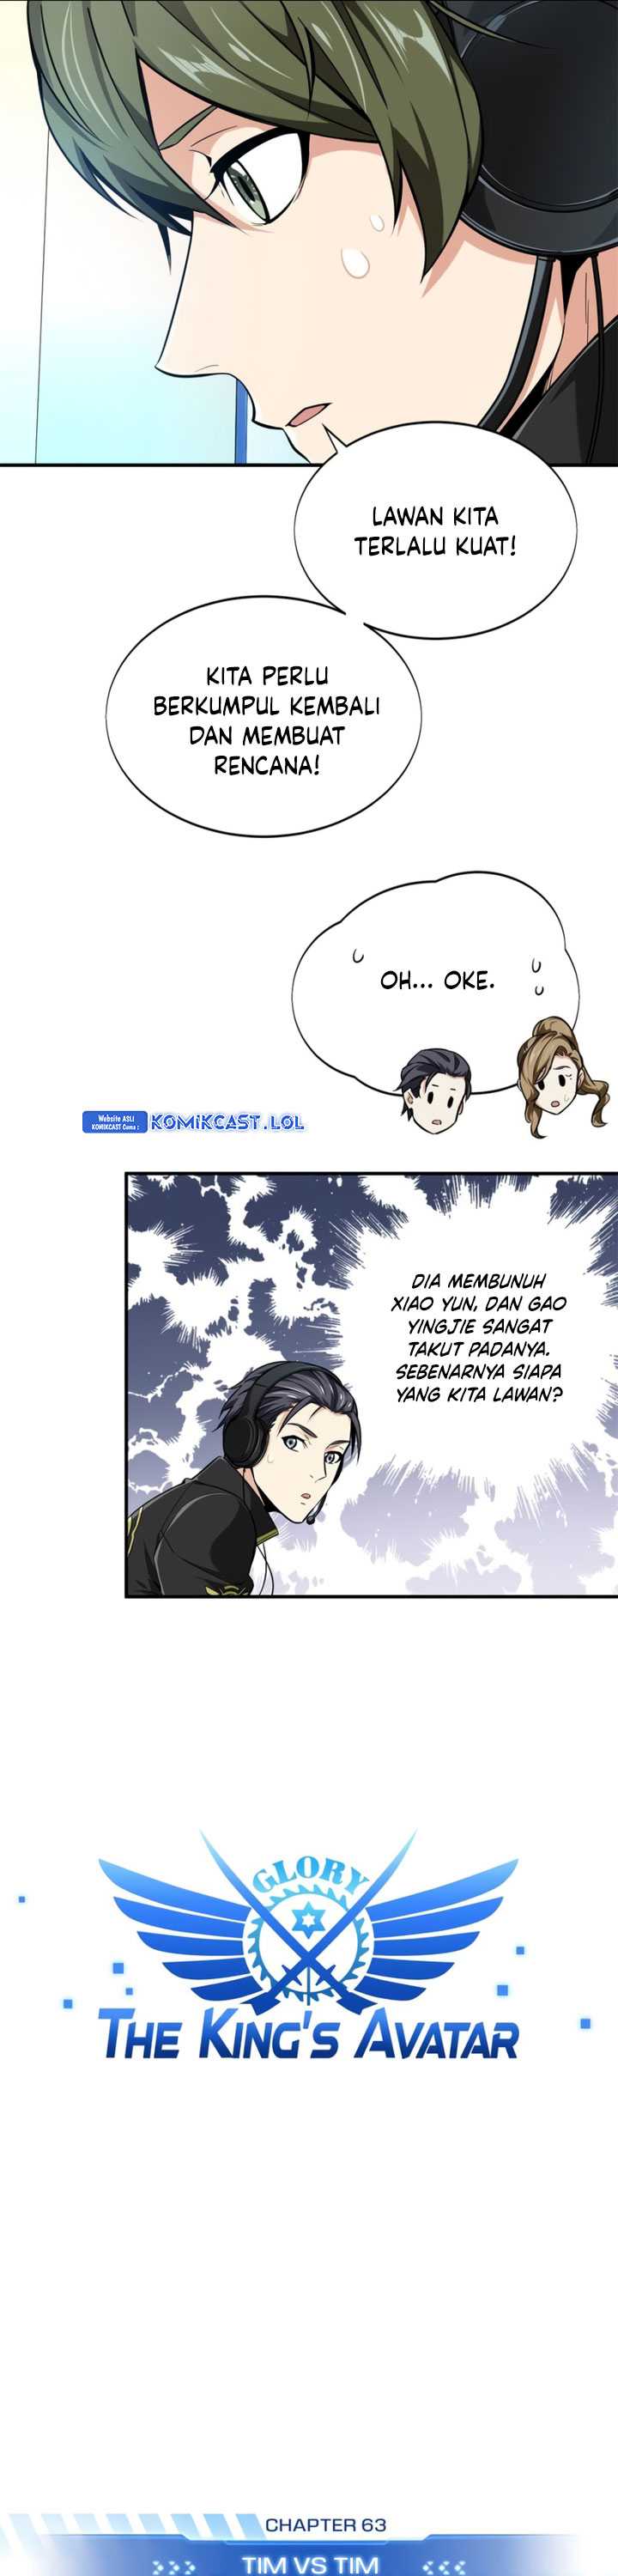 The King’s Avatar Chapter 63